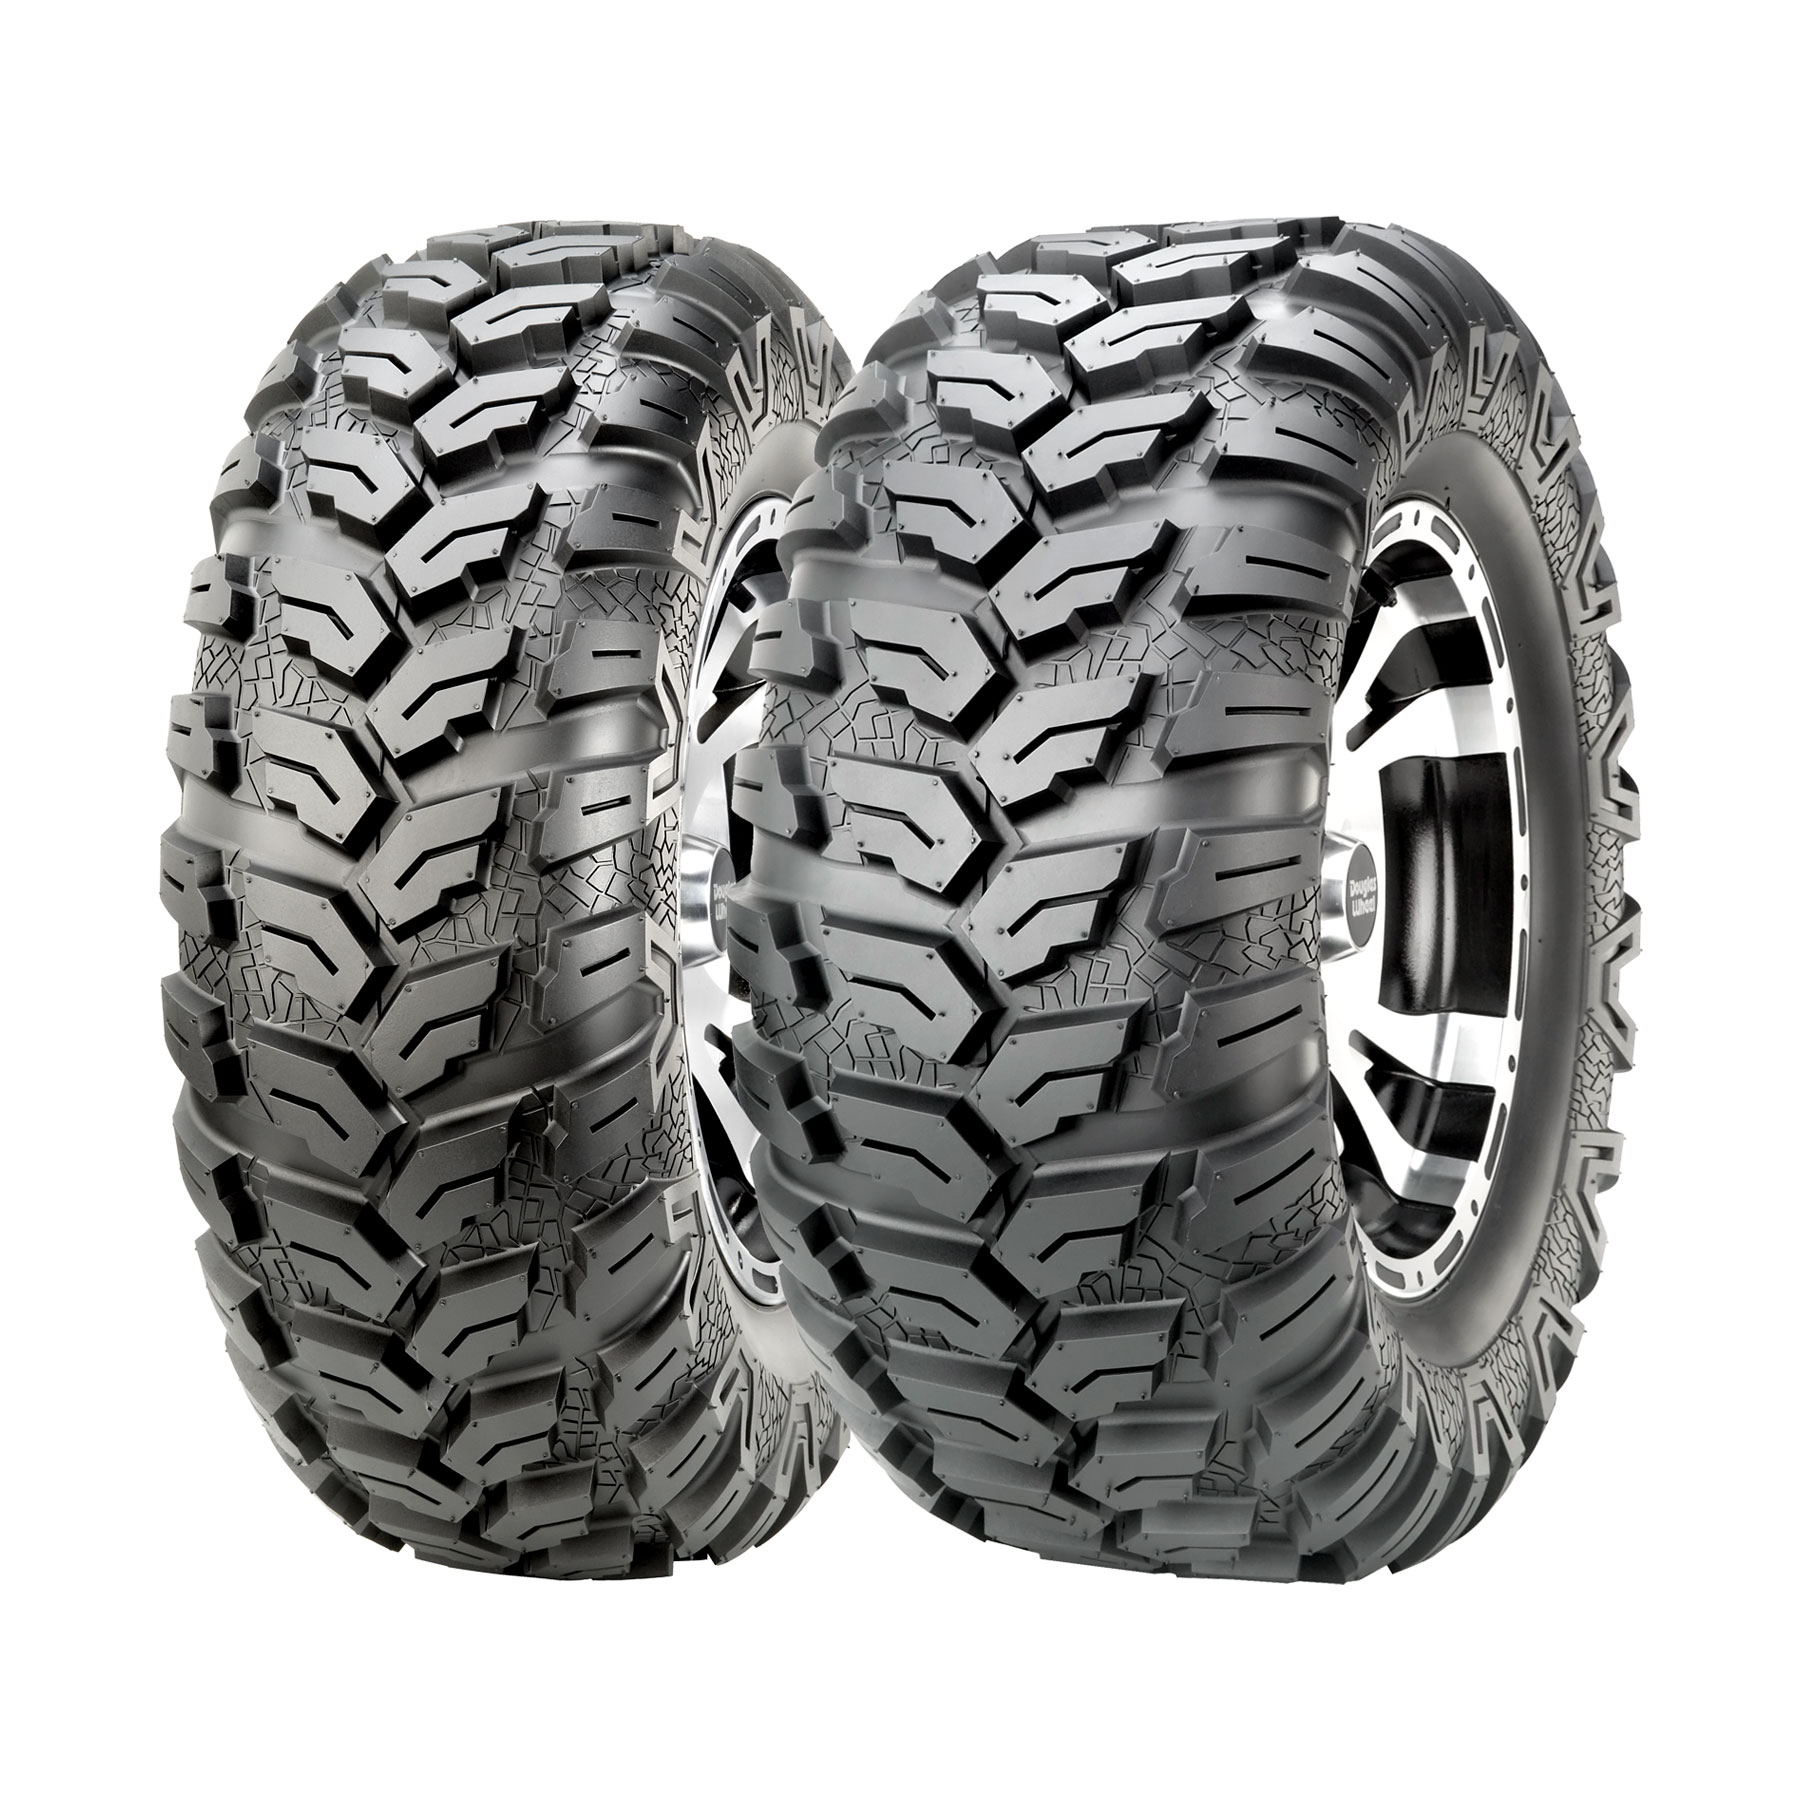 Maxxis Ceros Radial Tire 27x9-15